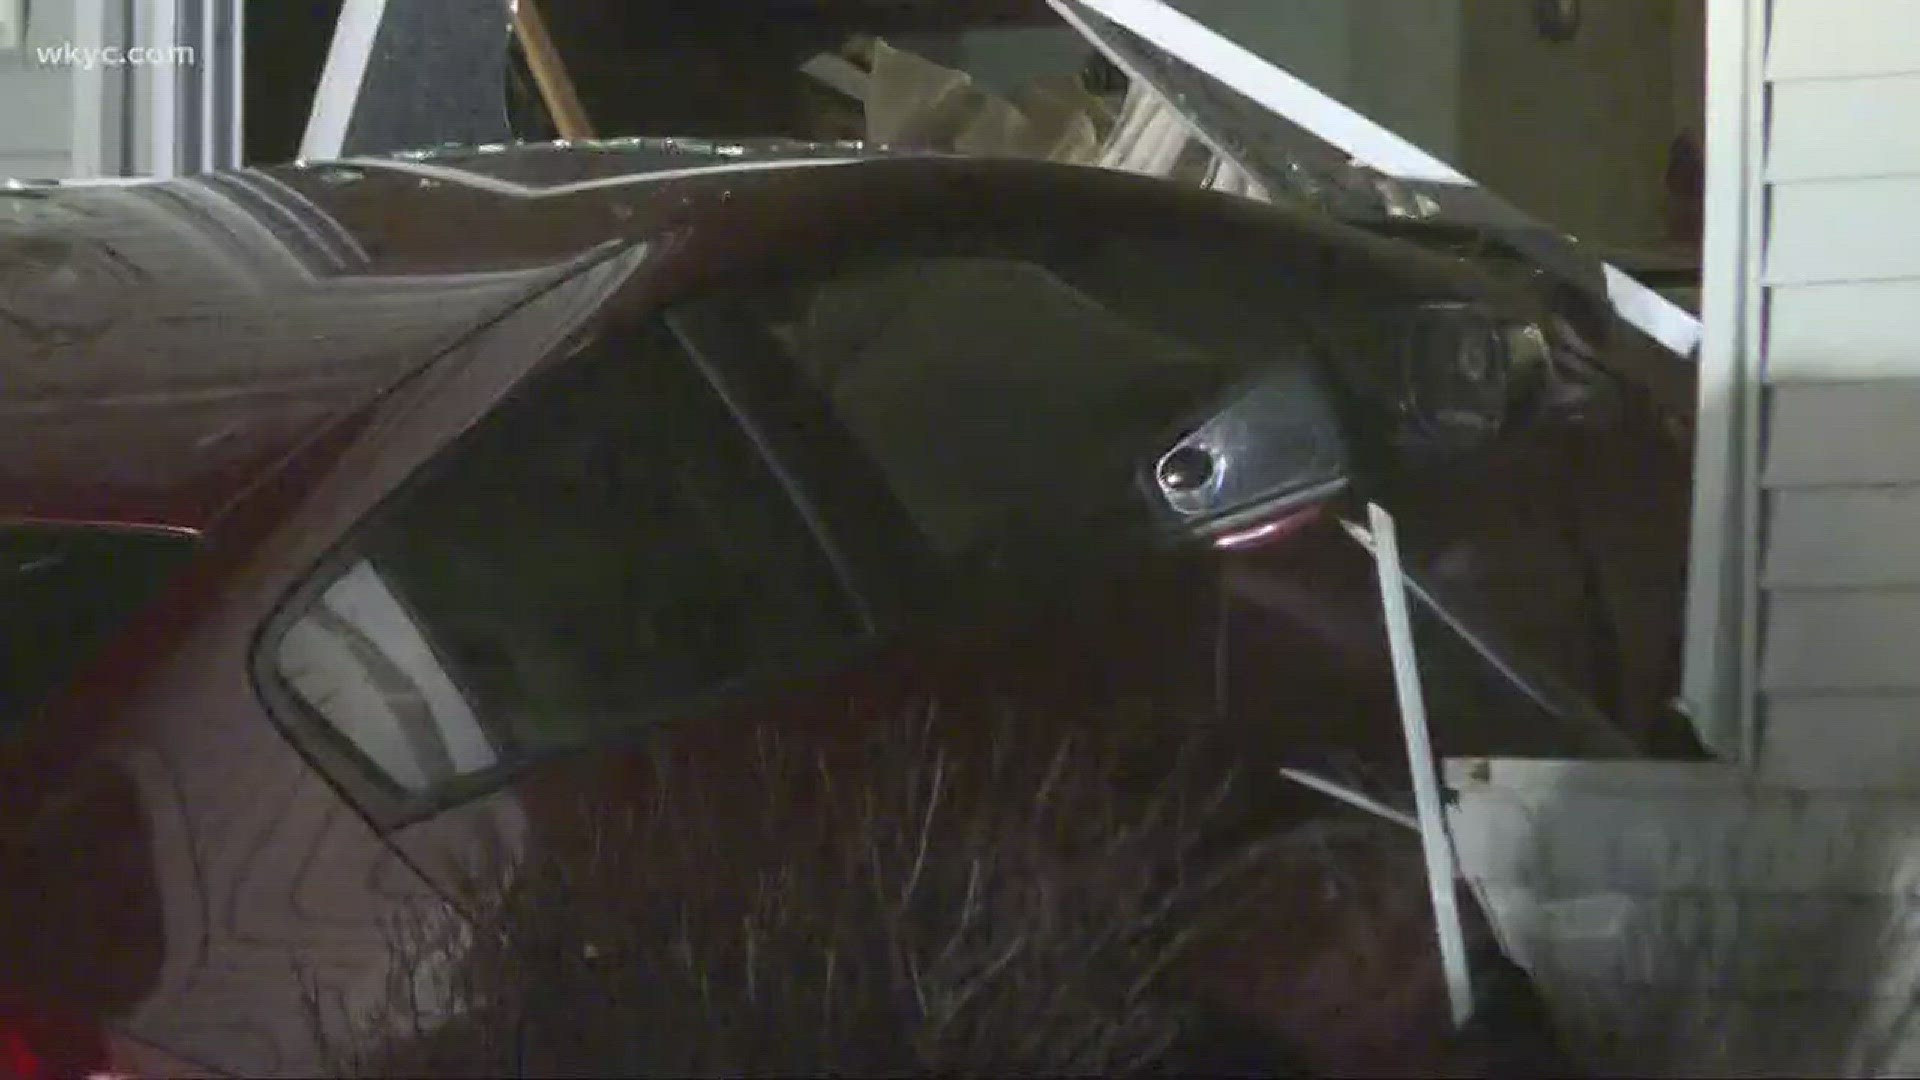 21-year-old arrested after car crashes into Parma home